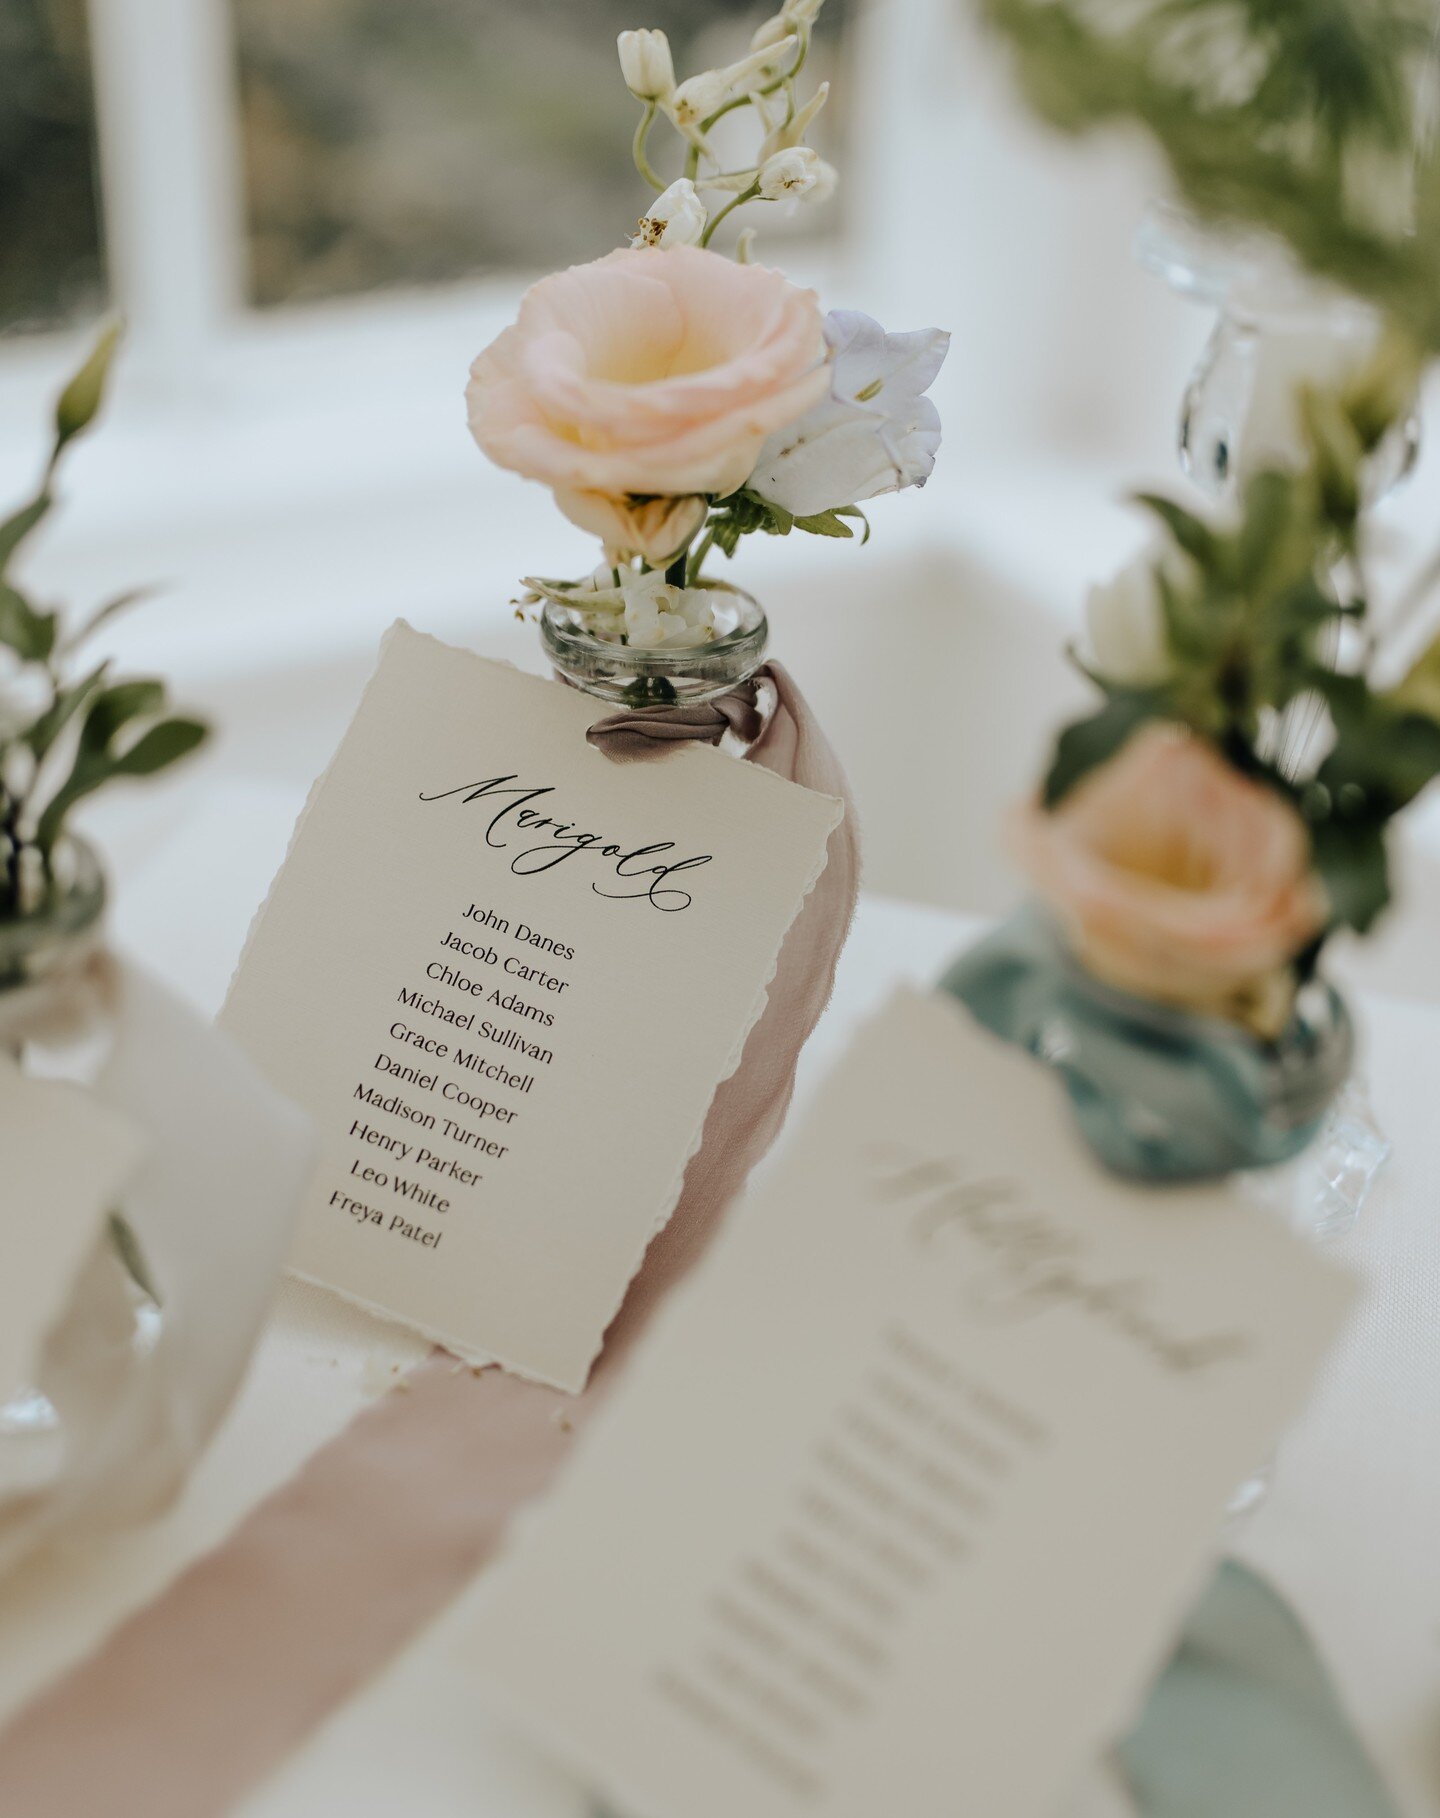 Table plan, but make it unique 🌸 I love a fun table plan display - you don't need to stick to signage if you fancy something a bit outside of the box and creating a point of interest at your wedding reception.

One of my favourite table plan display